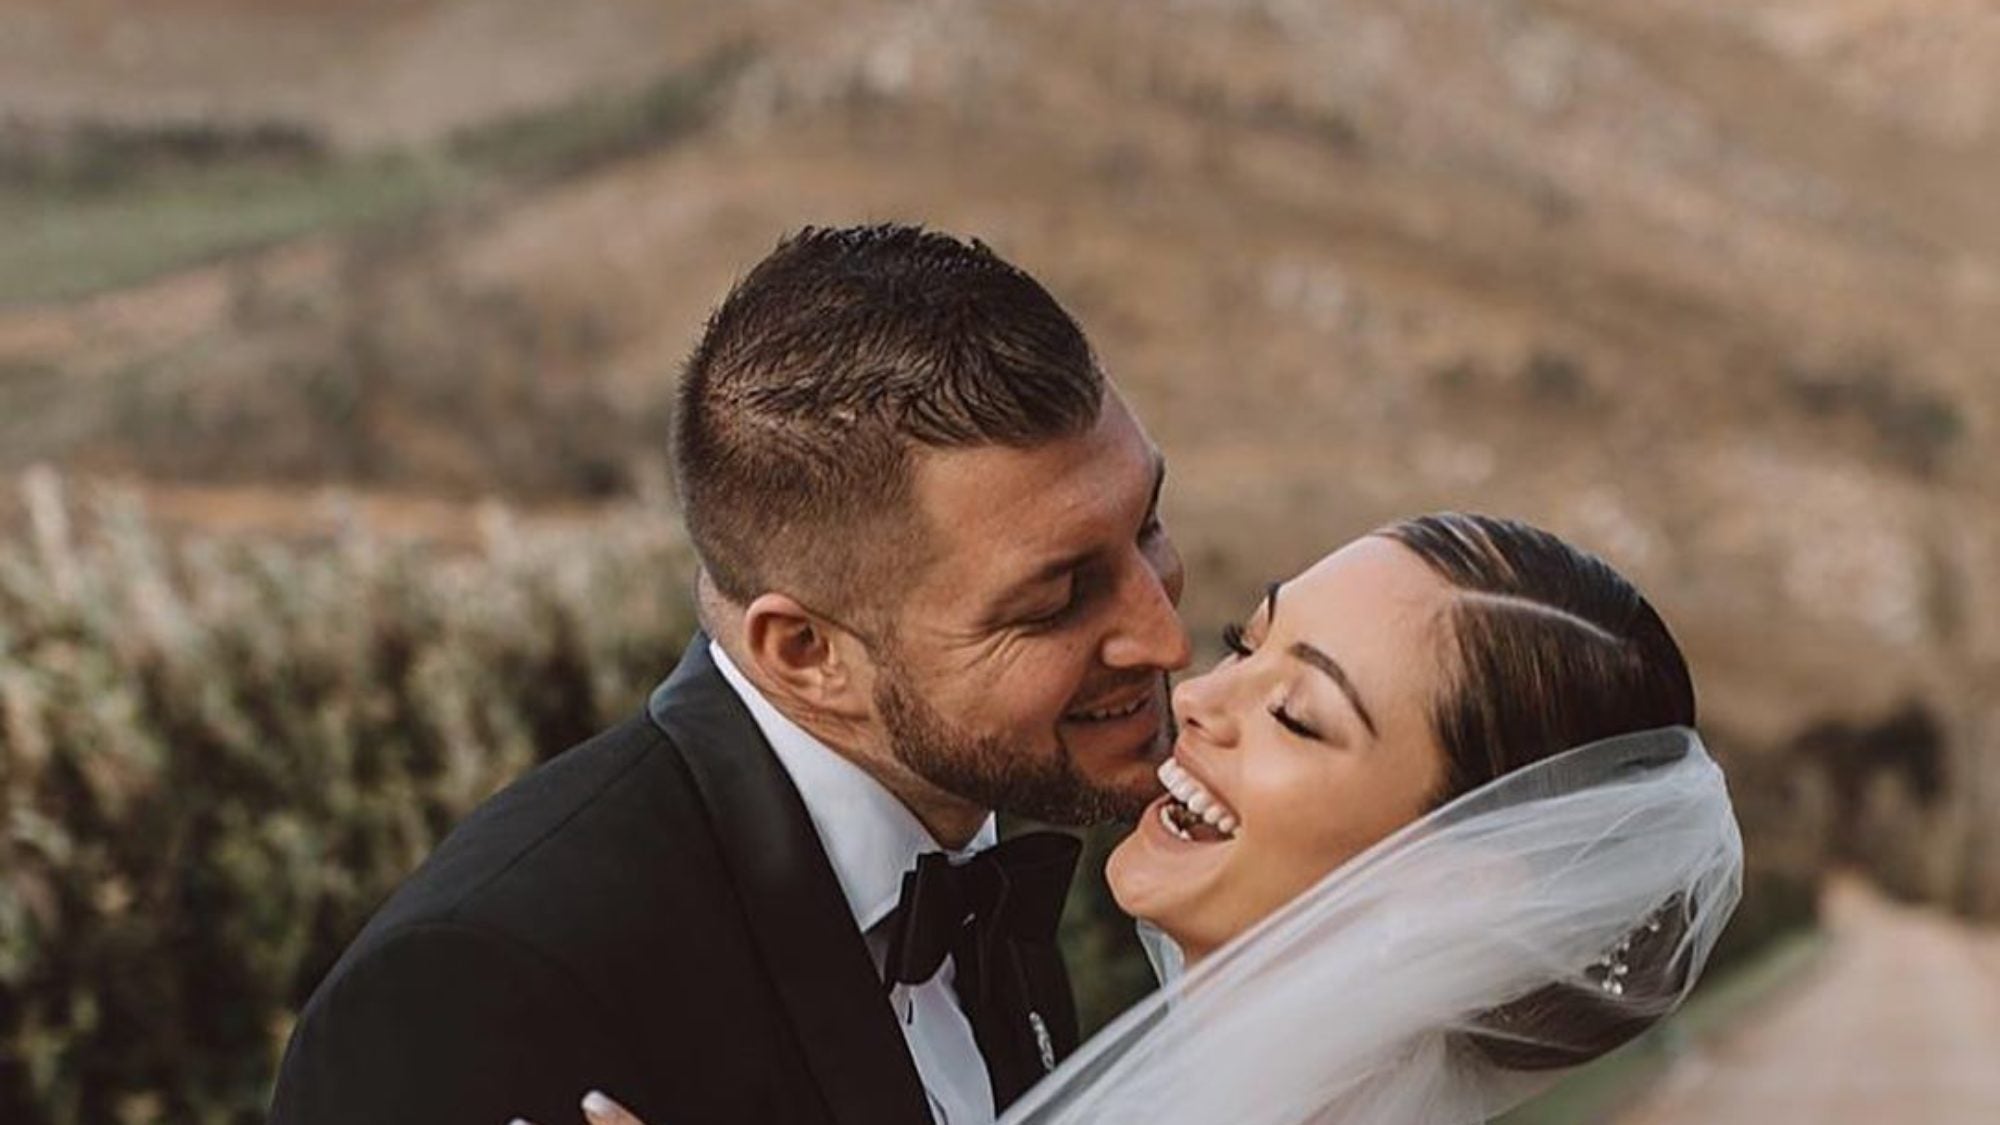 Tim Tebow Gets Married and Stays Keto During His Wedding